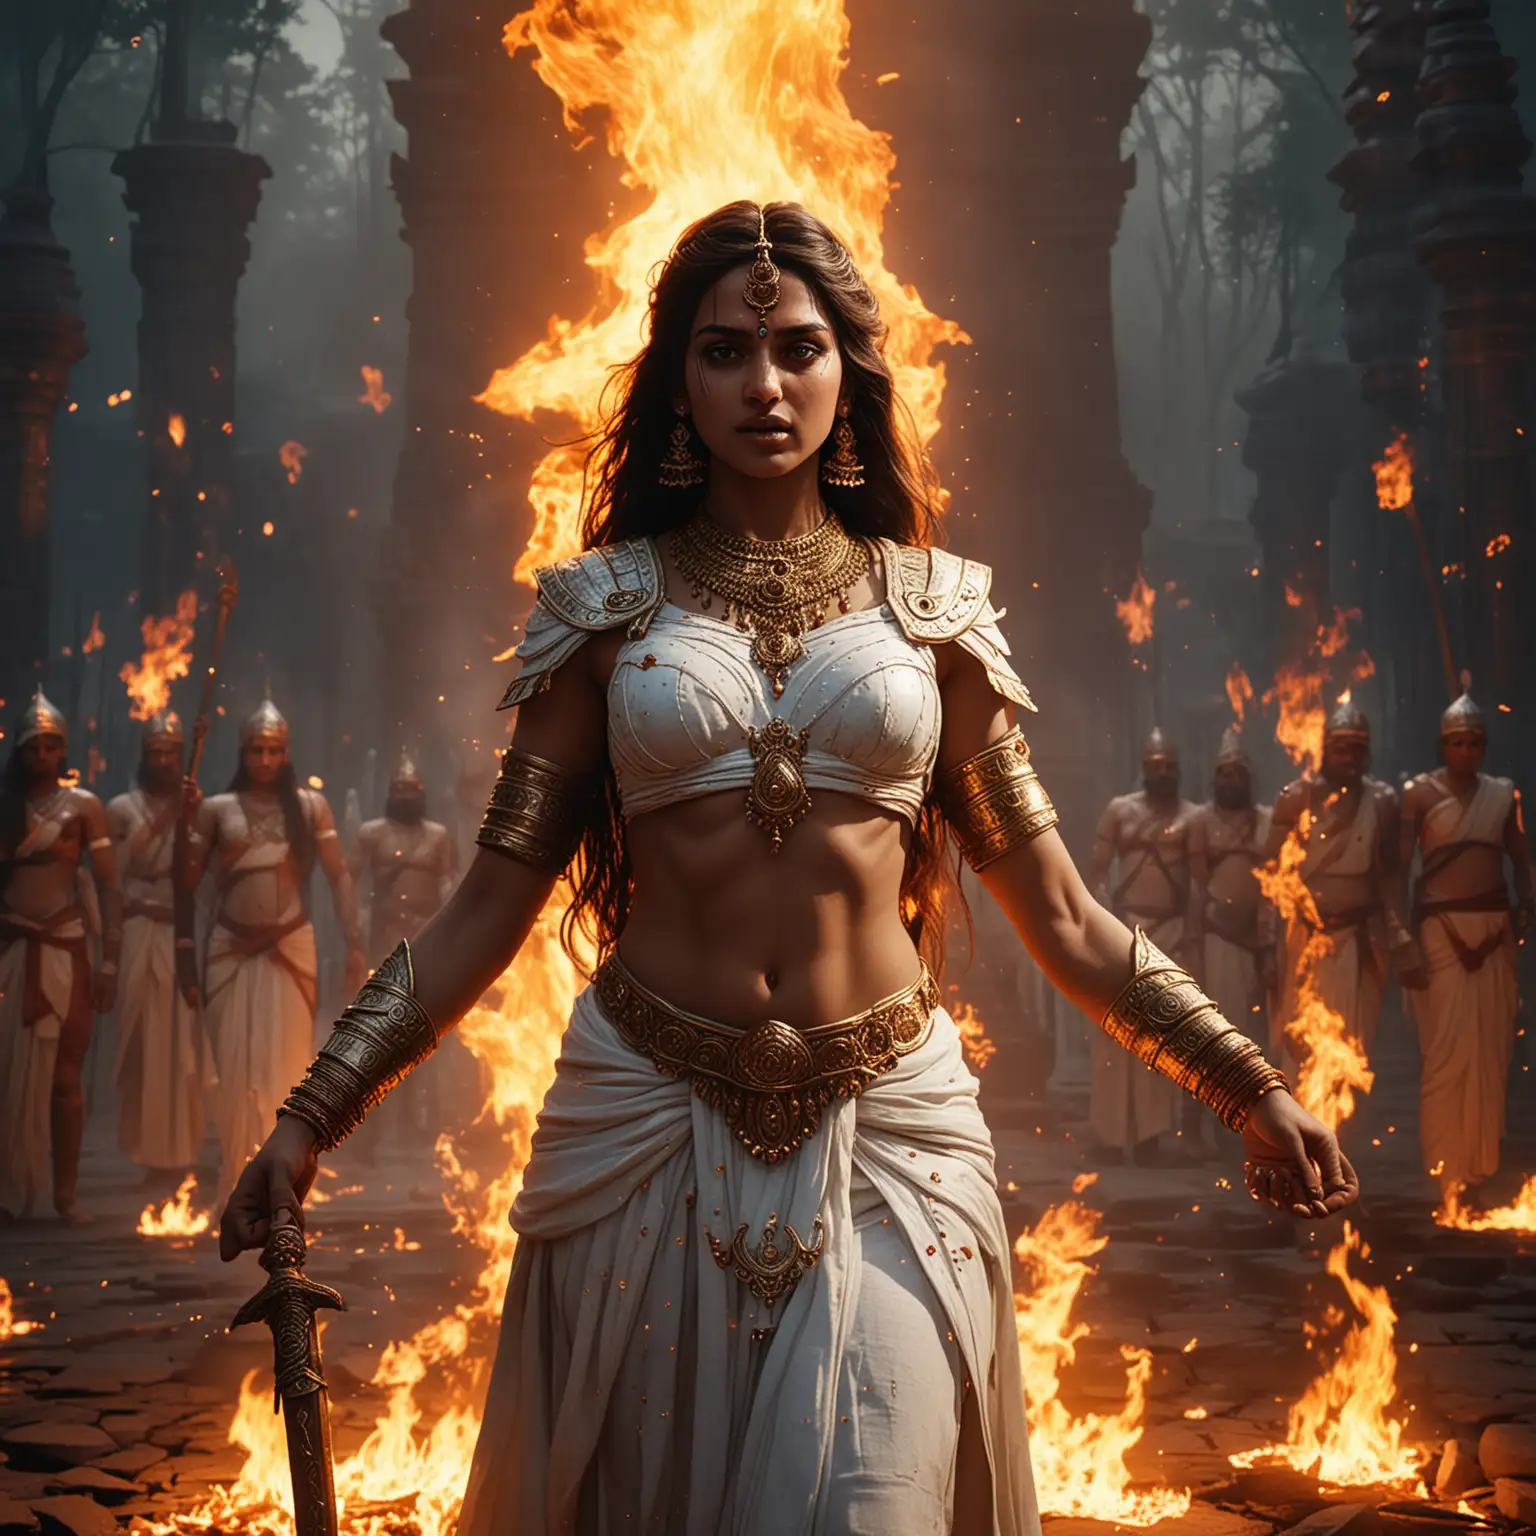 11 /imagine prompt: Realistic, personality: Amba performing severe penances, surrounded by flames and rituals signifying her transformation into Shikhandi, the mystical light engulfing her, symbolizing her rebirth as a fierce warrior in Mahabharata in white costume.unreal engine, hyper real --q 2 --v 5.2 --ar 16:9